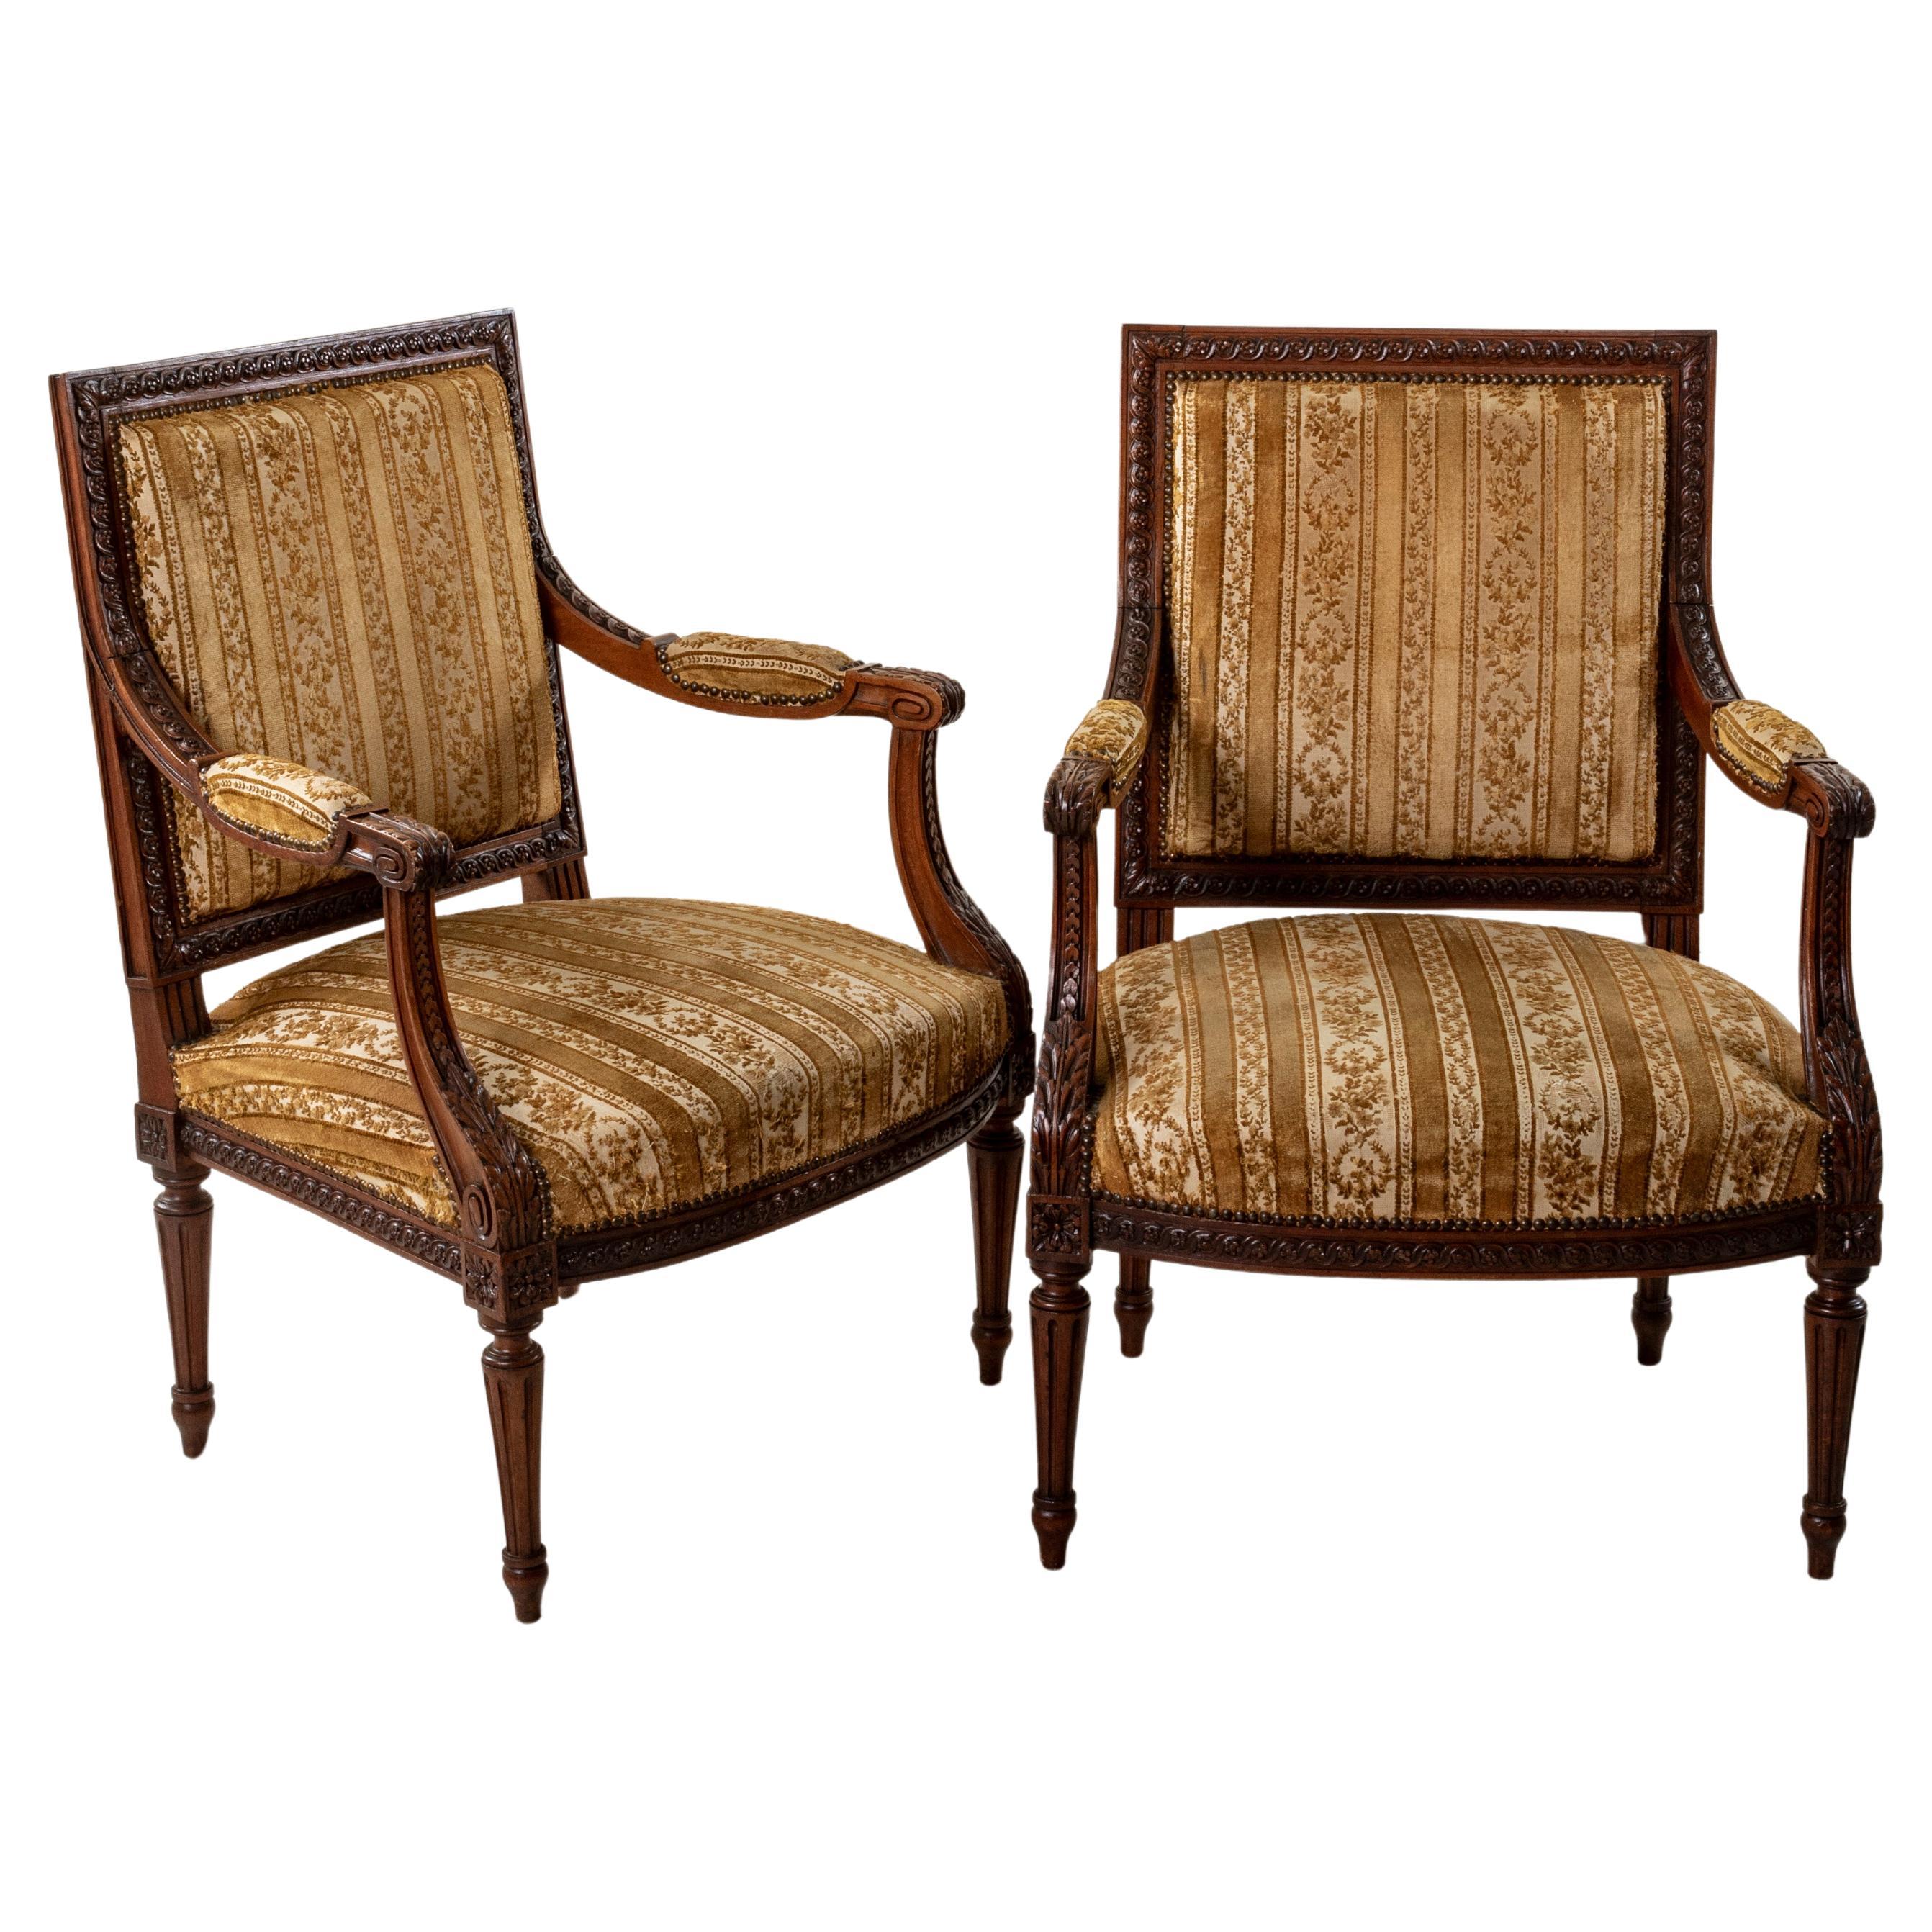 Pair of Late 19th Century French Louis XVI Style Hand Carved Walnut Armchairs For Sale